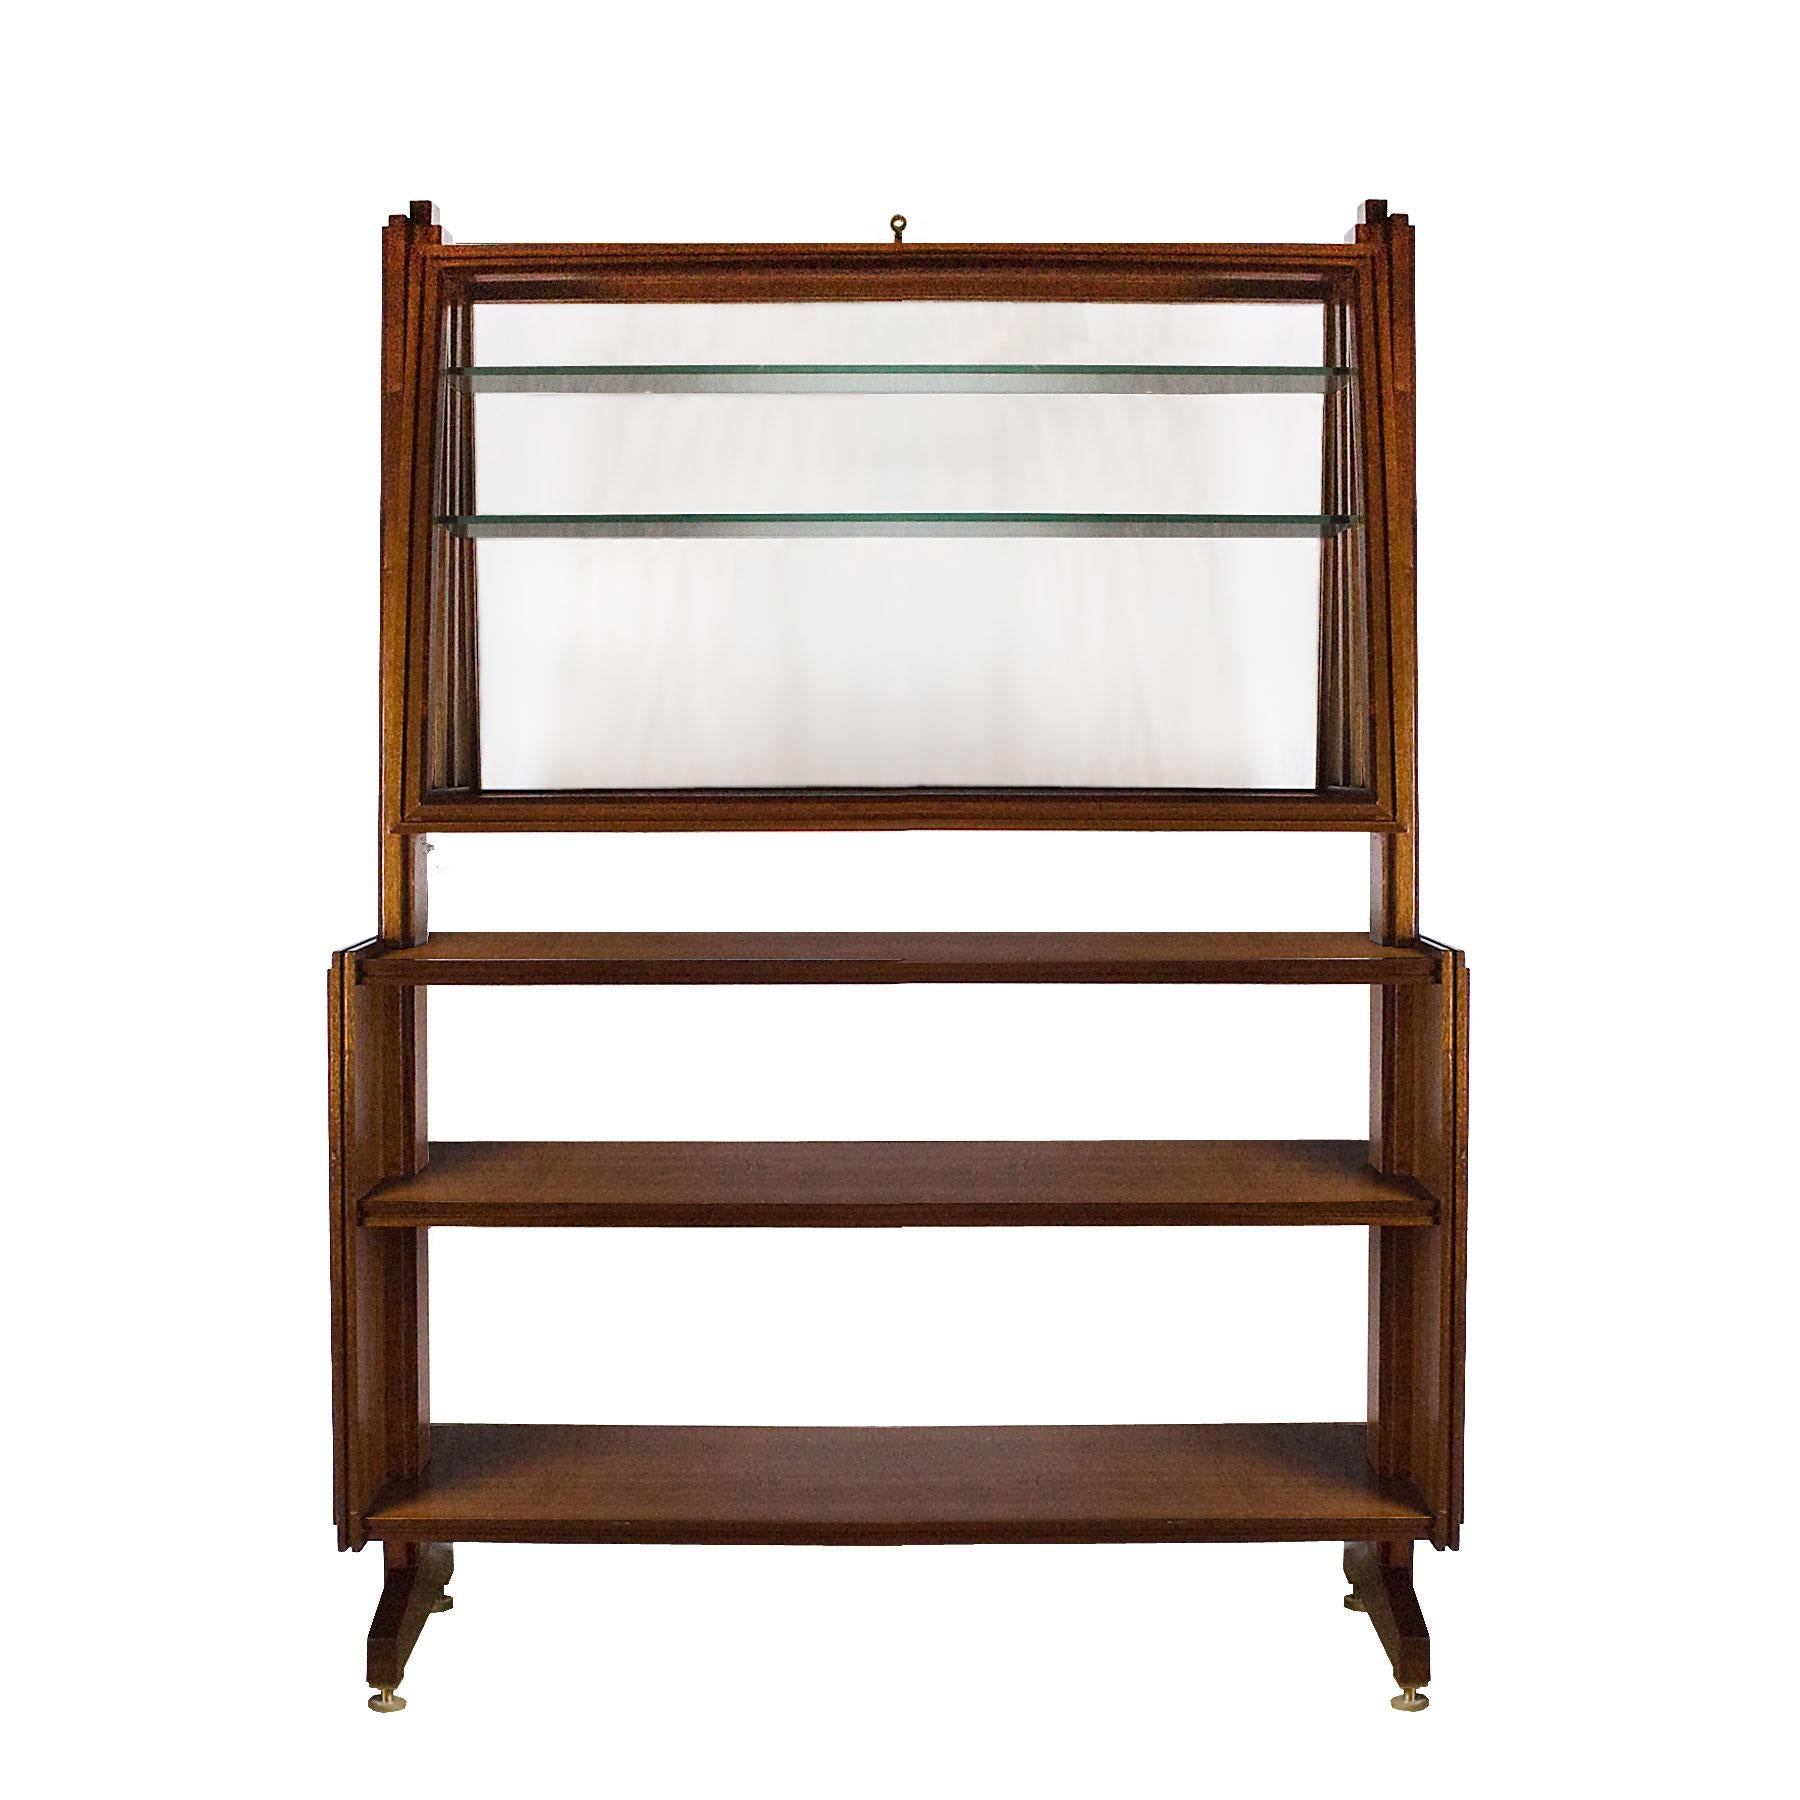 Exceptional central set of shelves - vitrine in solid and veneered mahogany, glass flap door with 2 glass shelves inside, decorated with marquetry and frieze hiding the internal lightning system, brass feet.

Italy, circa 1950.